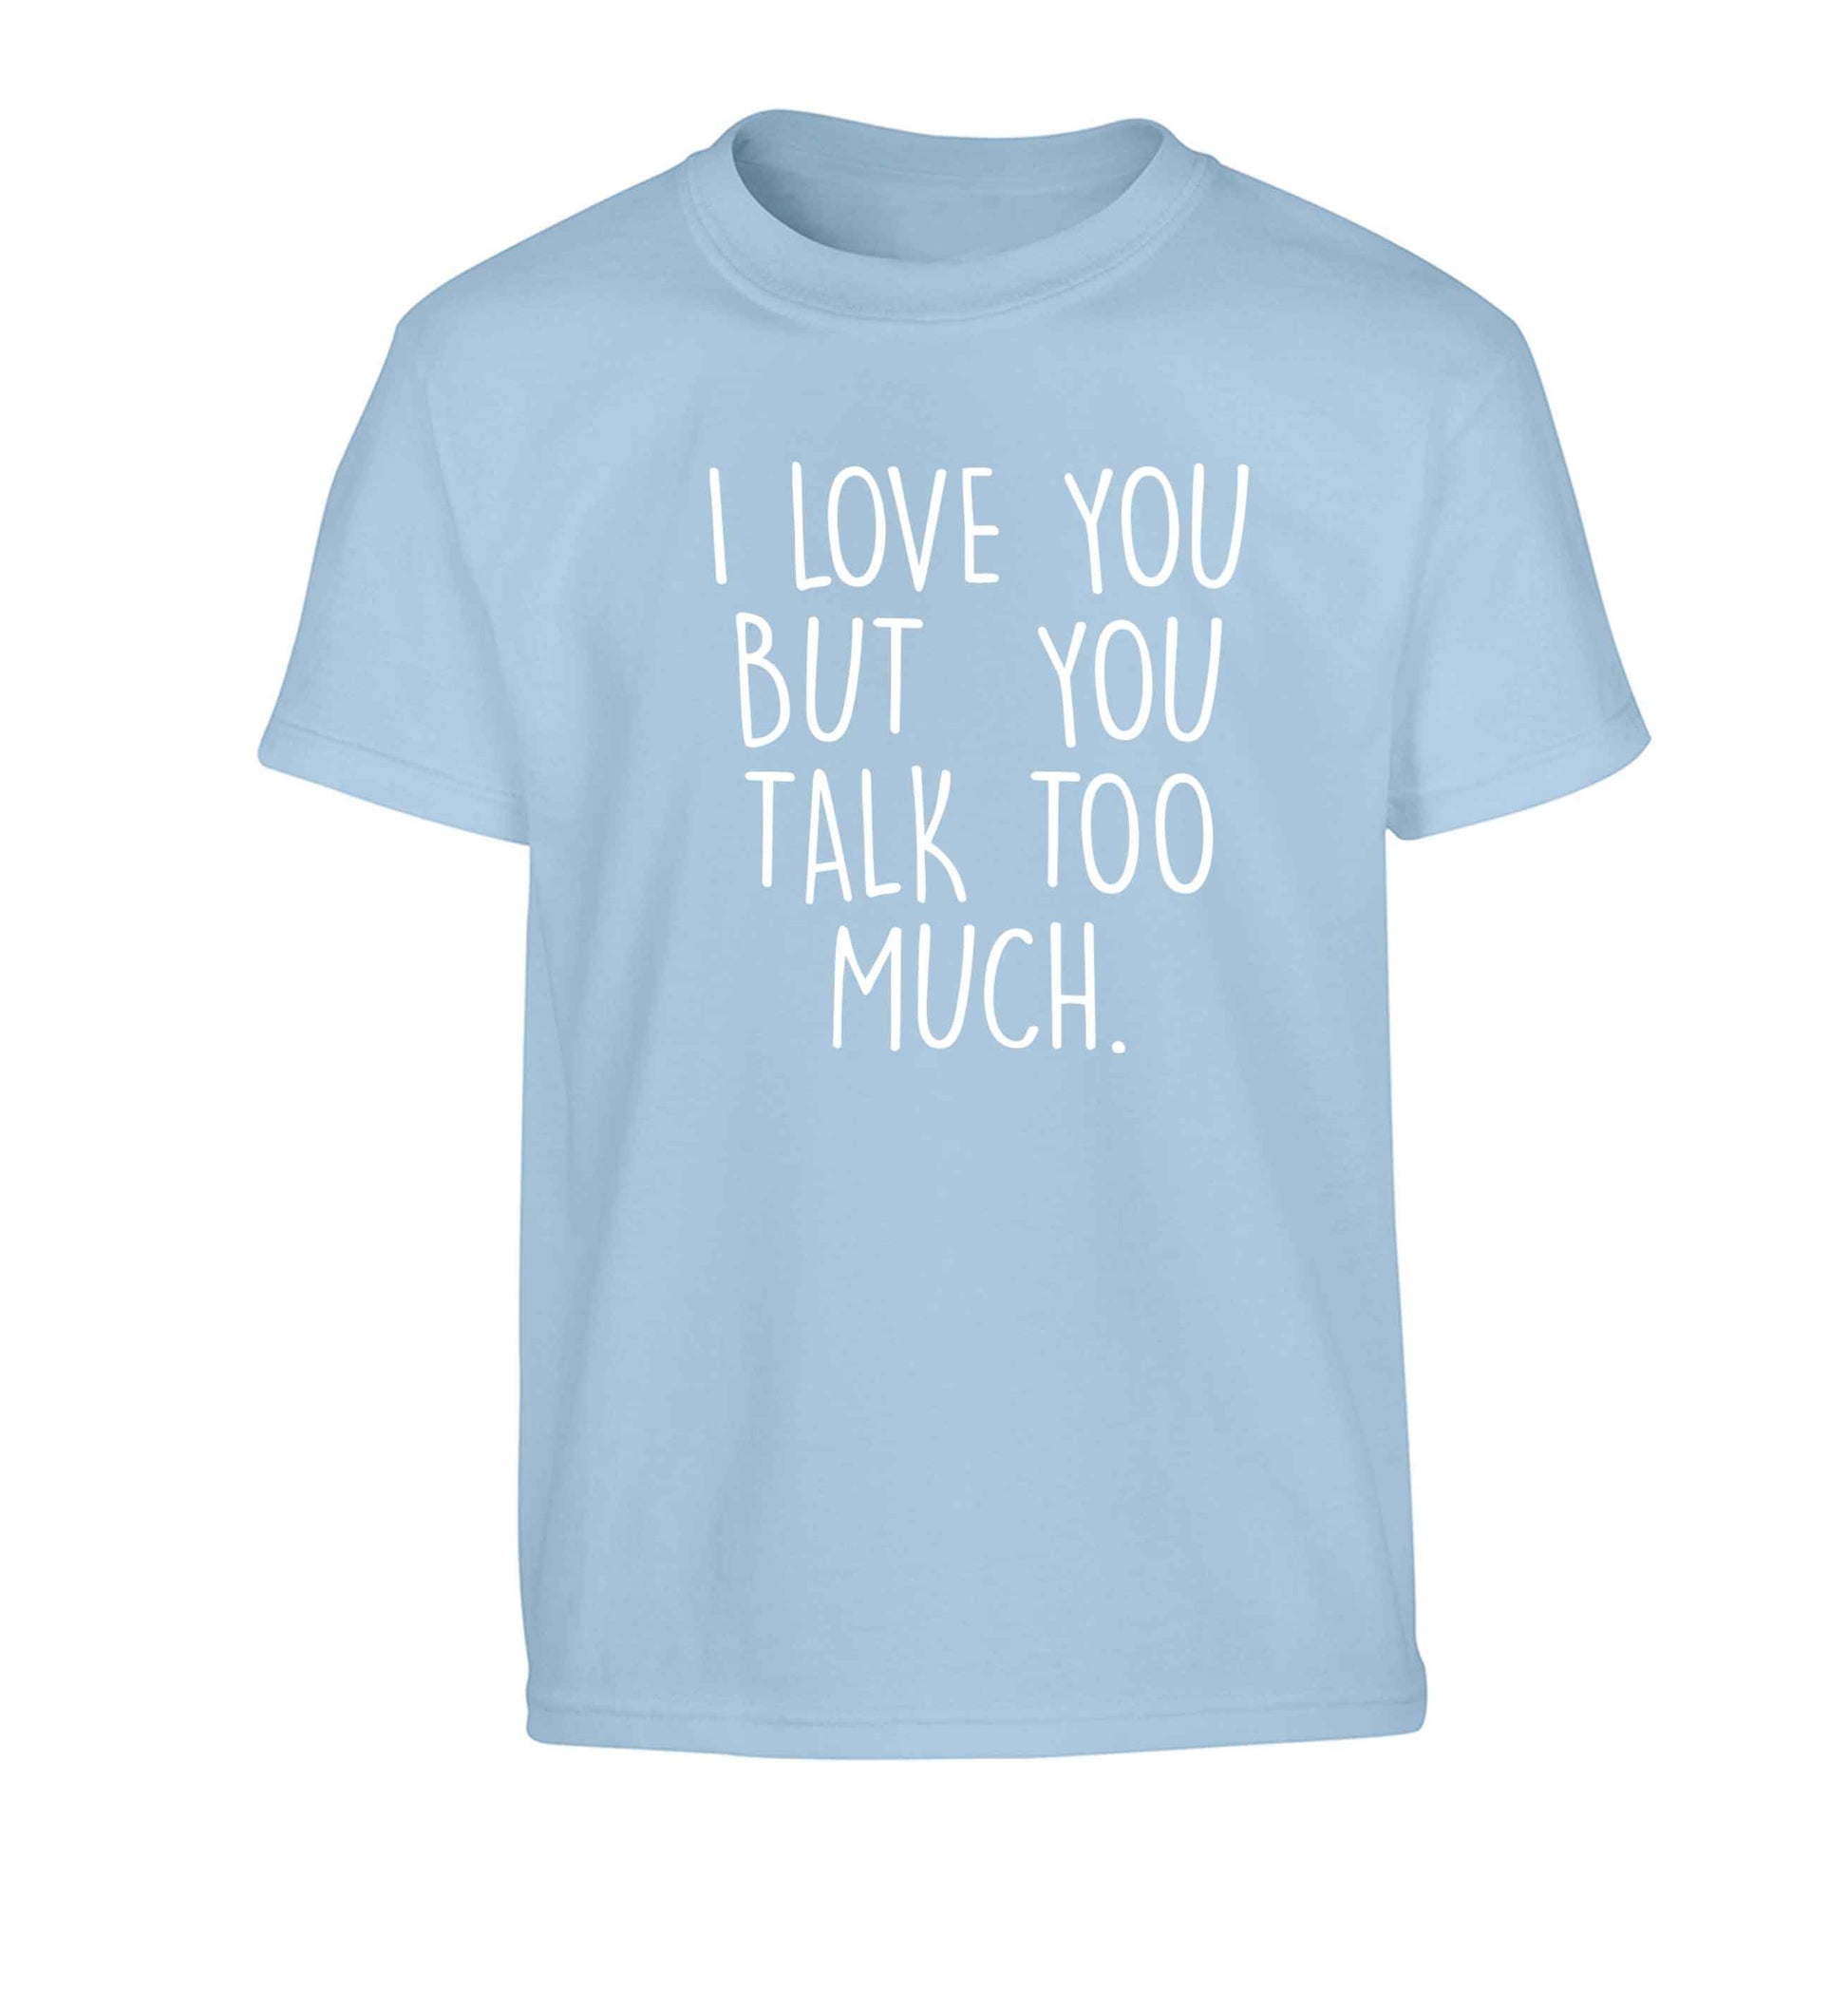 I love you but you talk too much Children's light blue Tshirt 12-13 Years